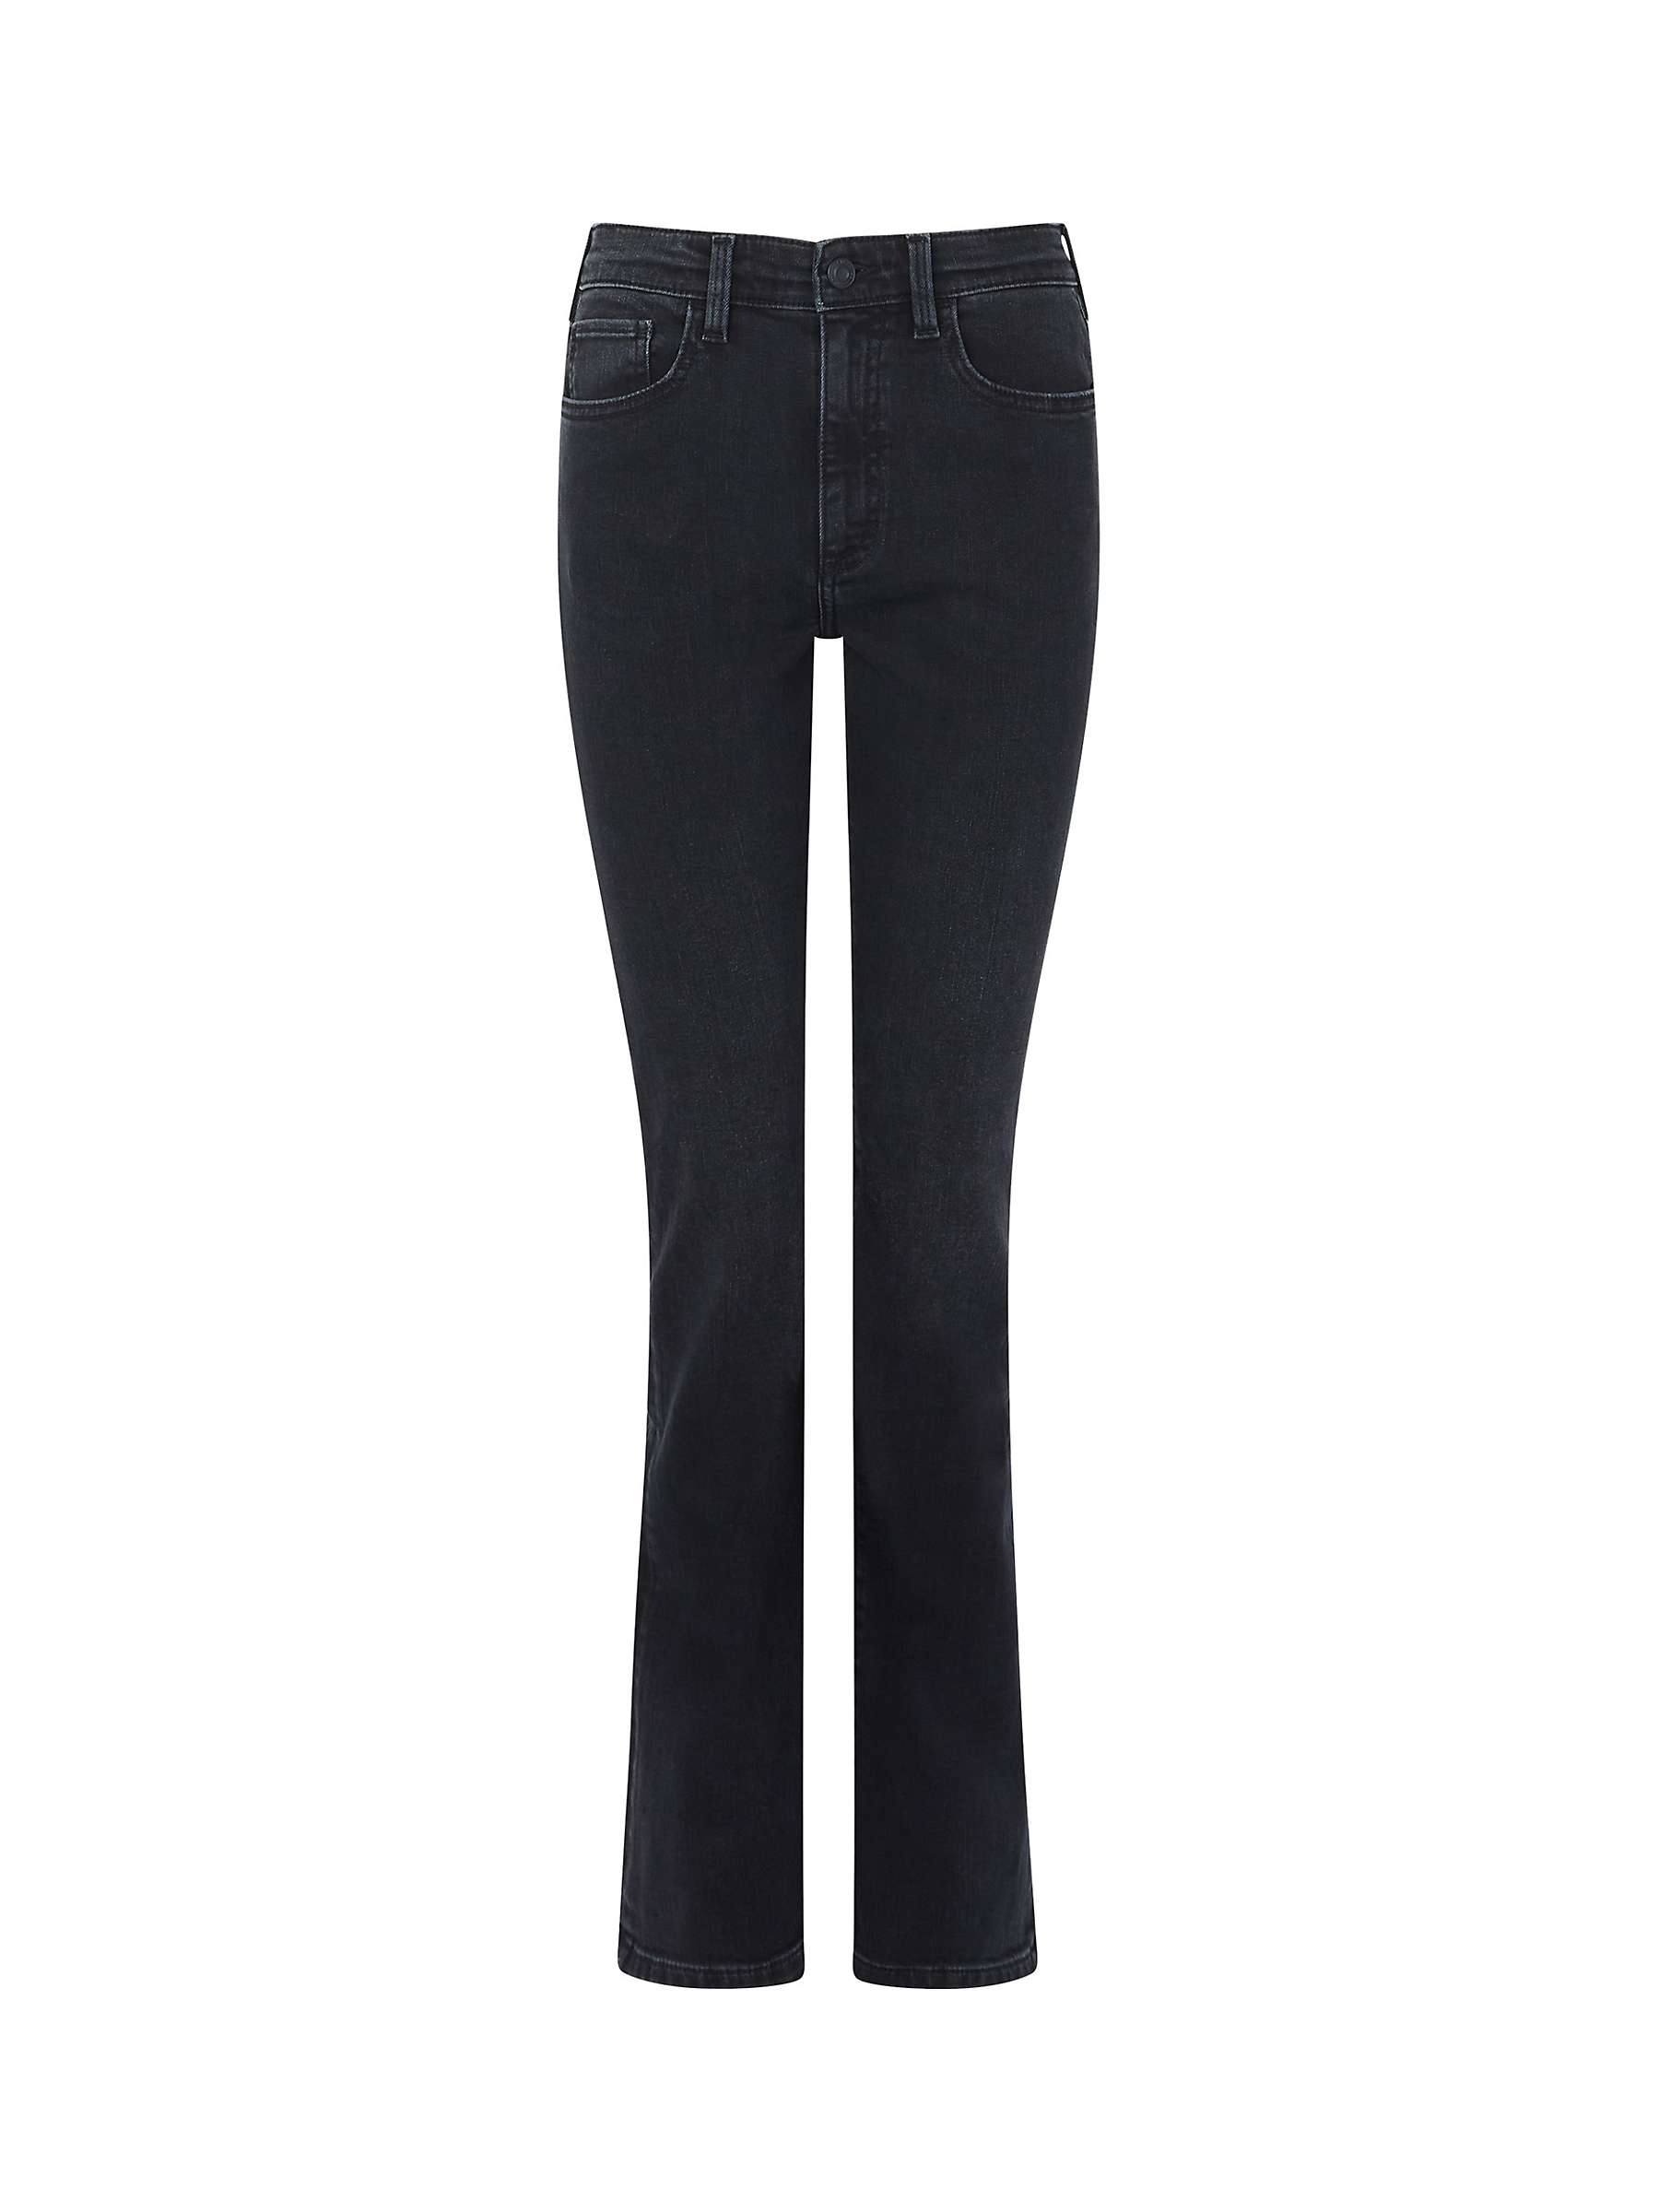 Buy French Connection Stretch Demi Jeans, Black Online at johnlewis.com